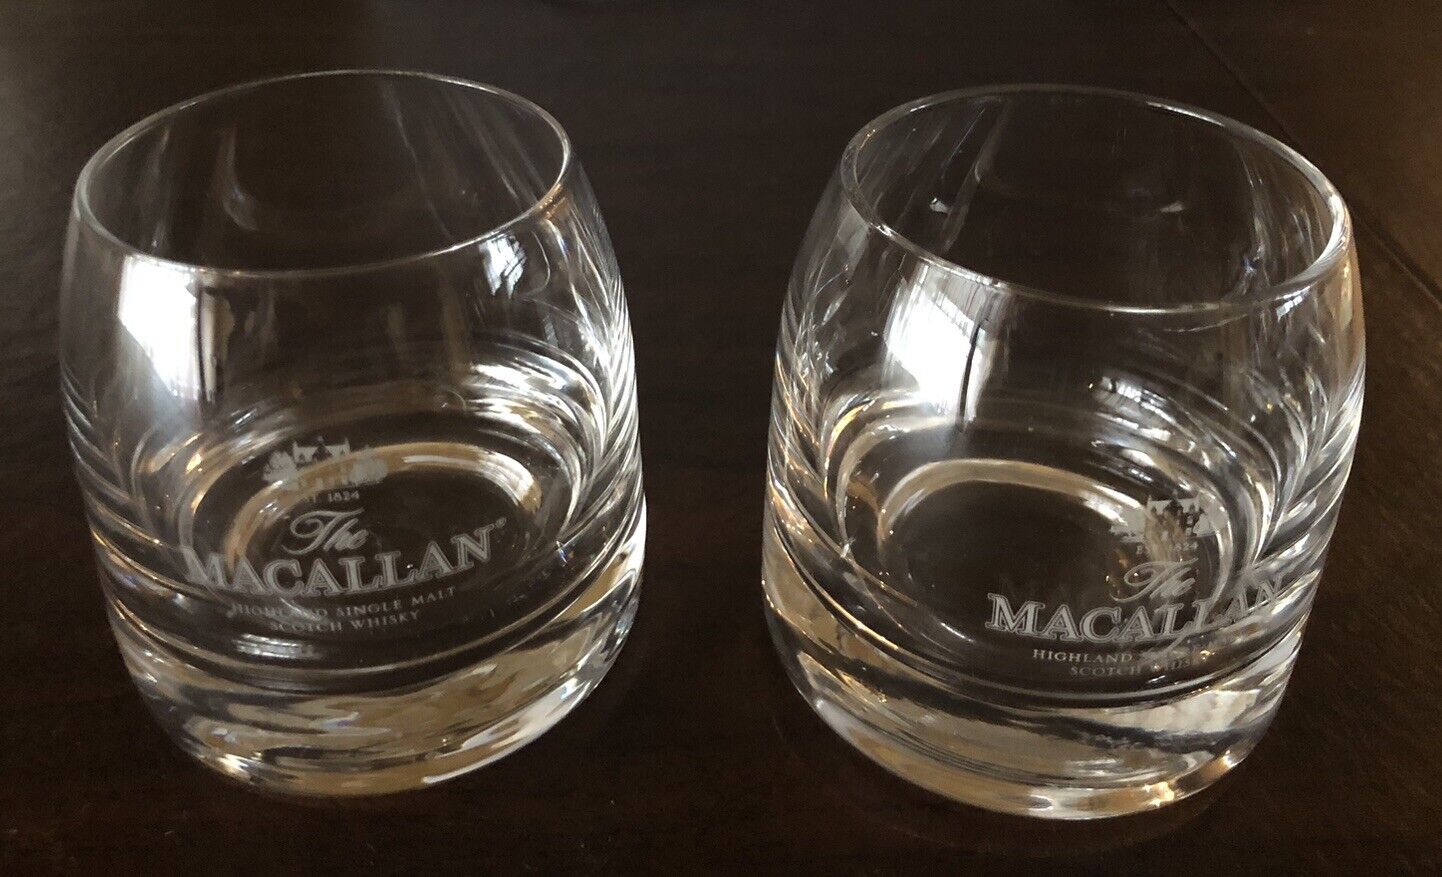 The Macallan Highland Single Malt Scotch Whiskey glasses SET of 2. See condition